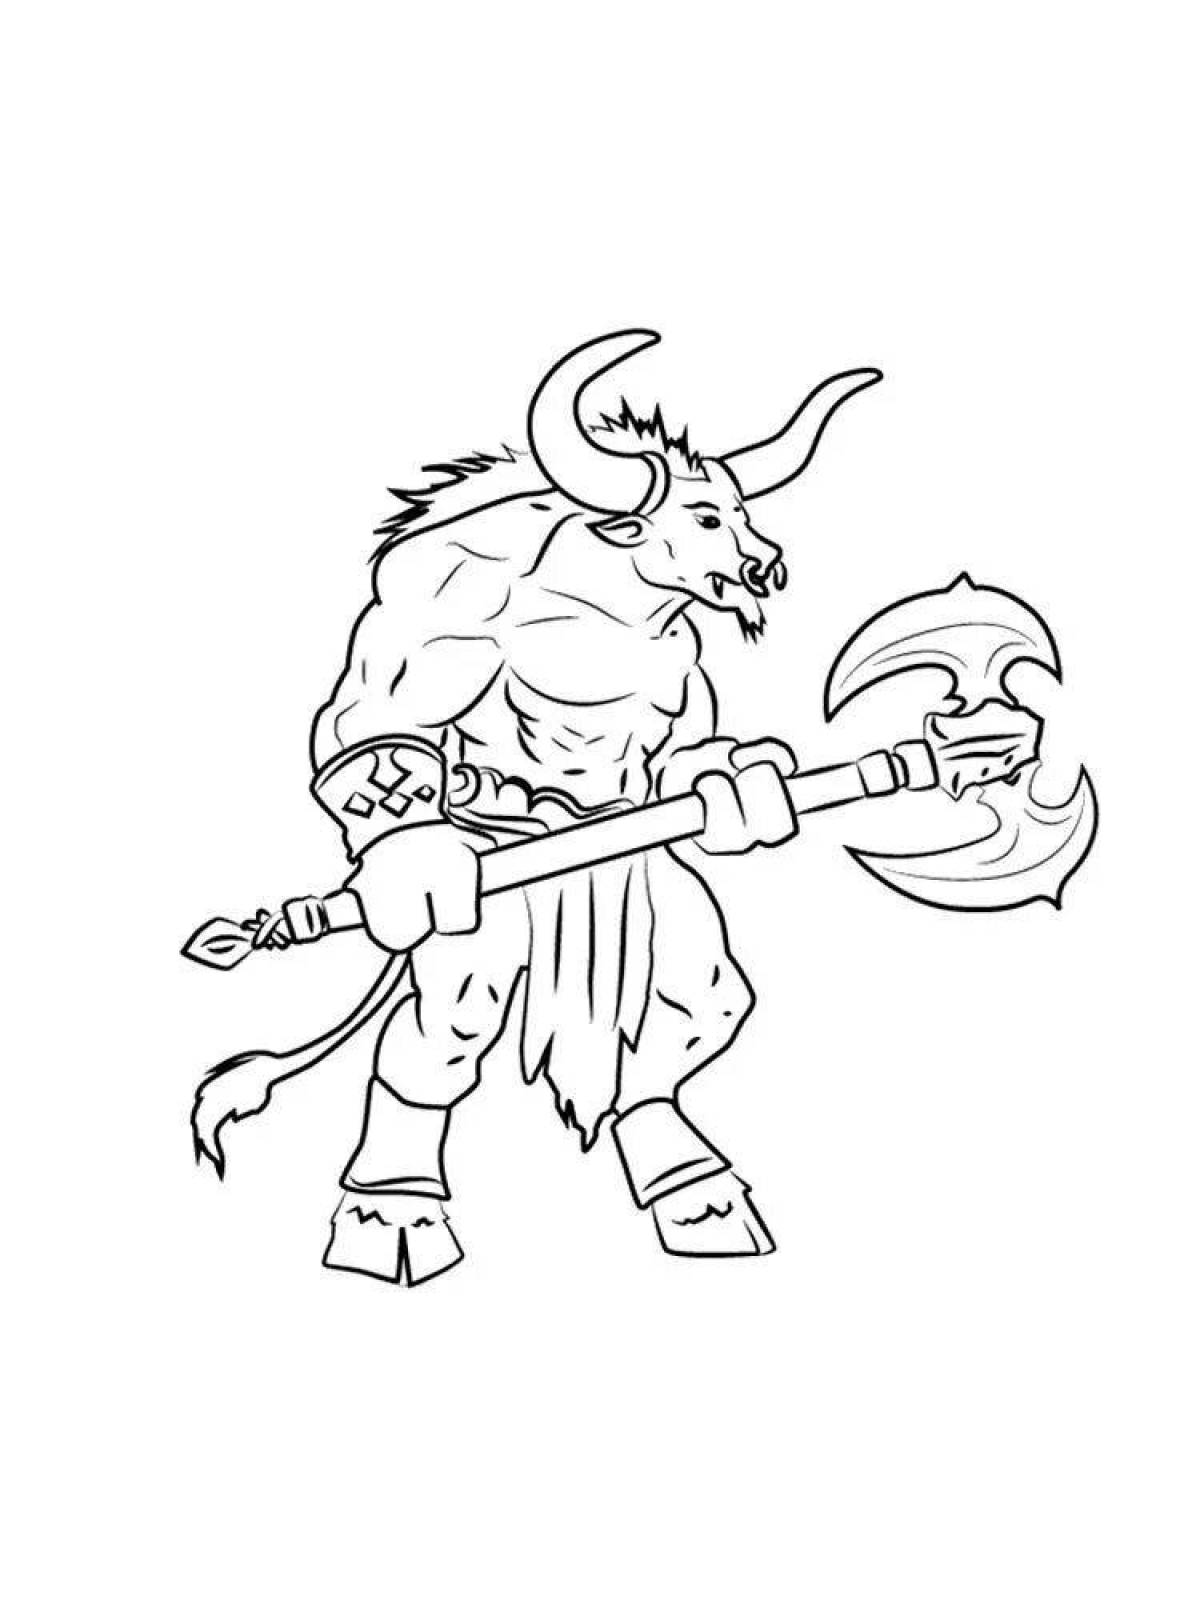 Minotaur colorful coloring page